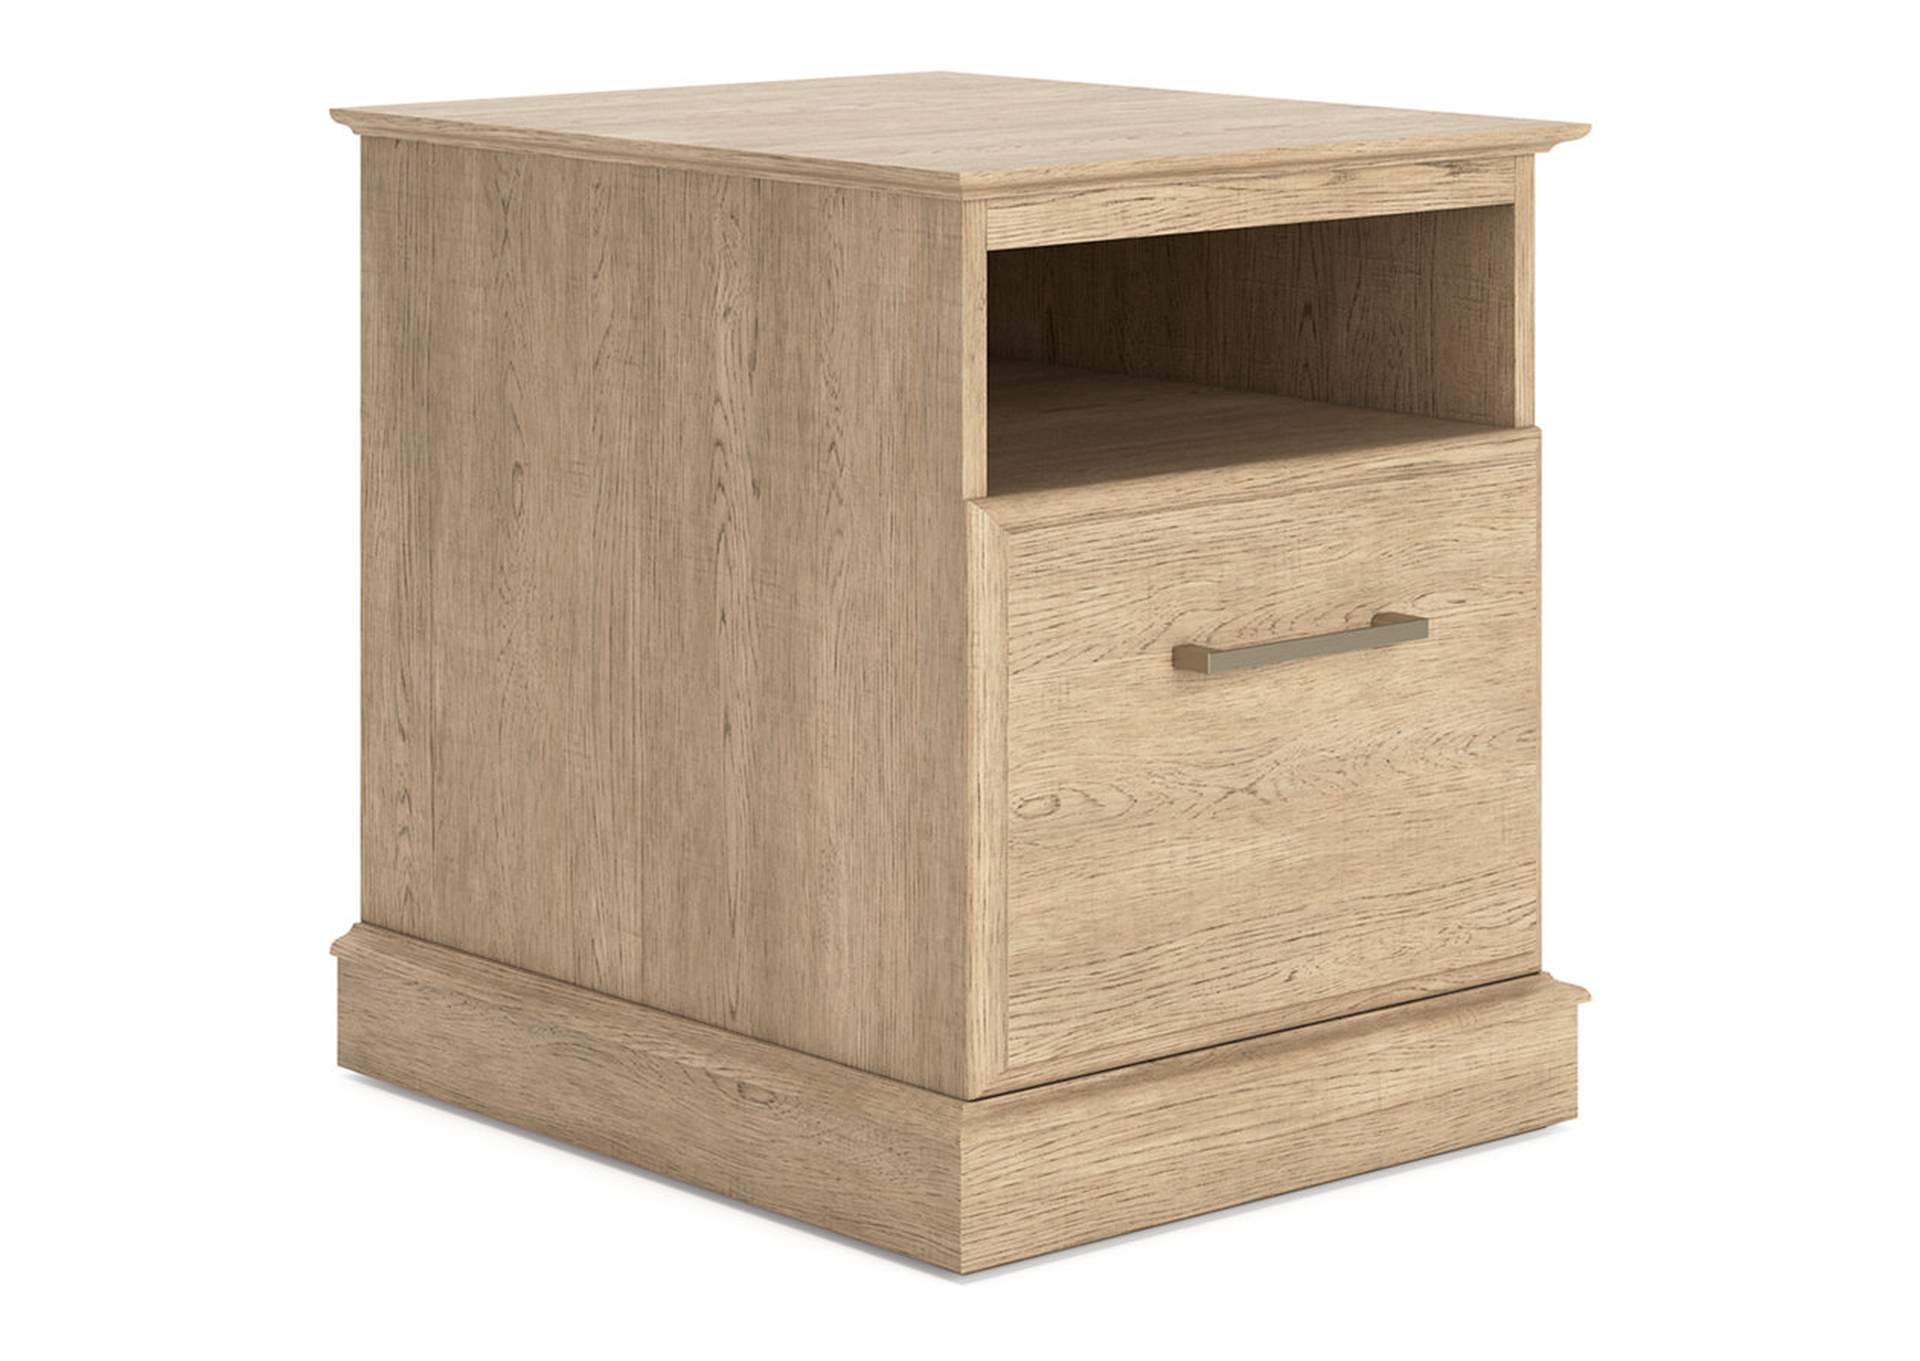 Elmferd Home Office Desk and Storage,Signature Design By Ashley